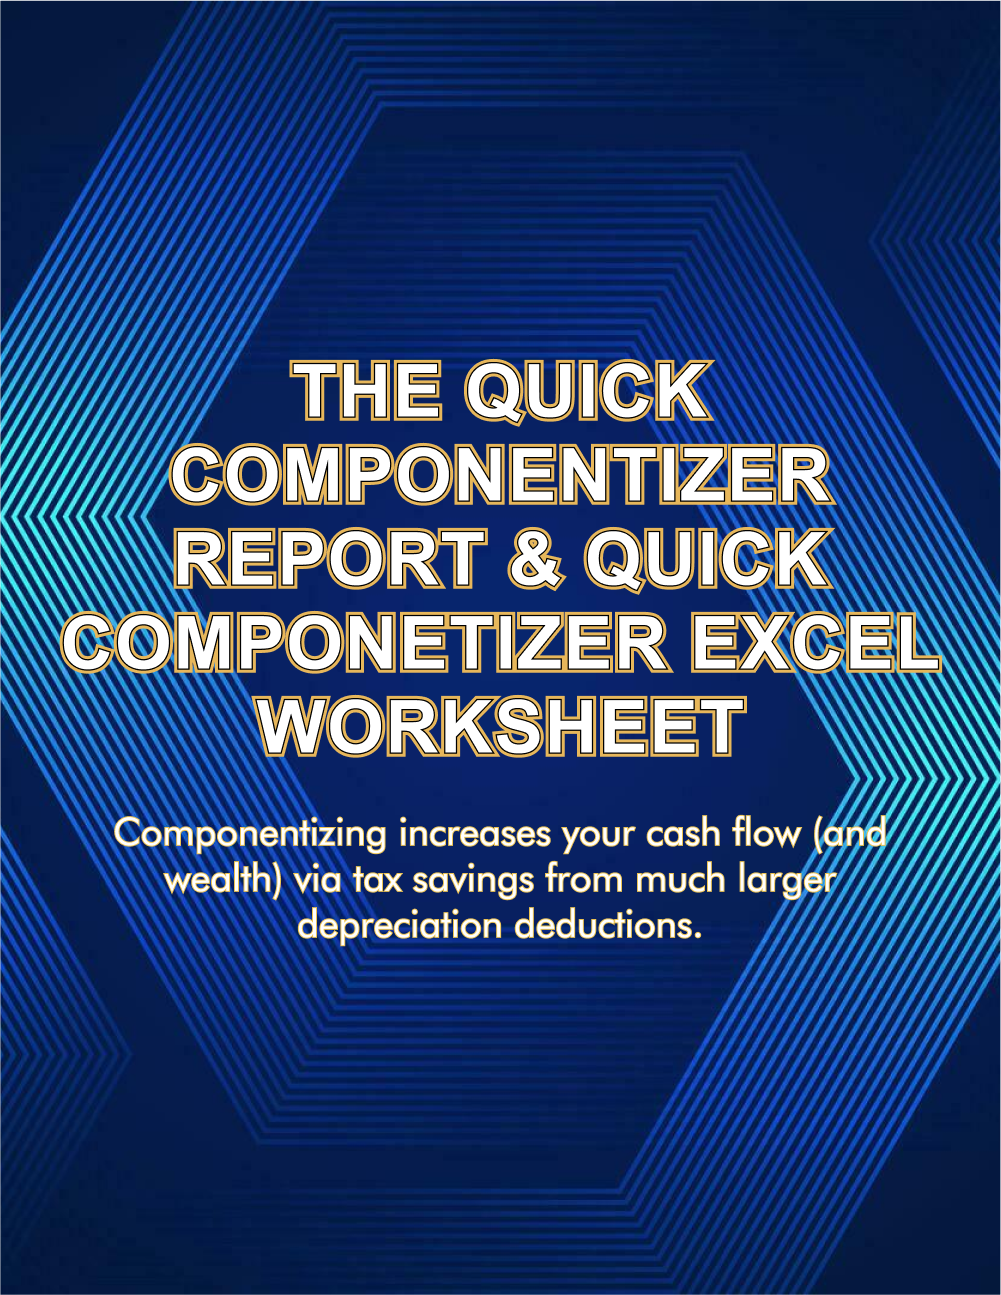 The Quick Componentizer Report & Quick Componetizer Excel Worksheet